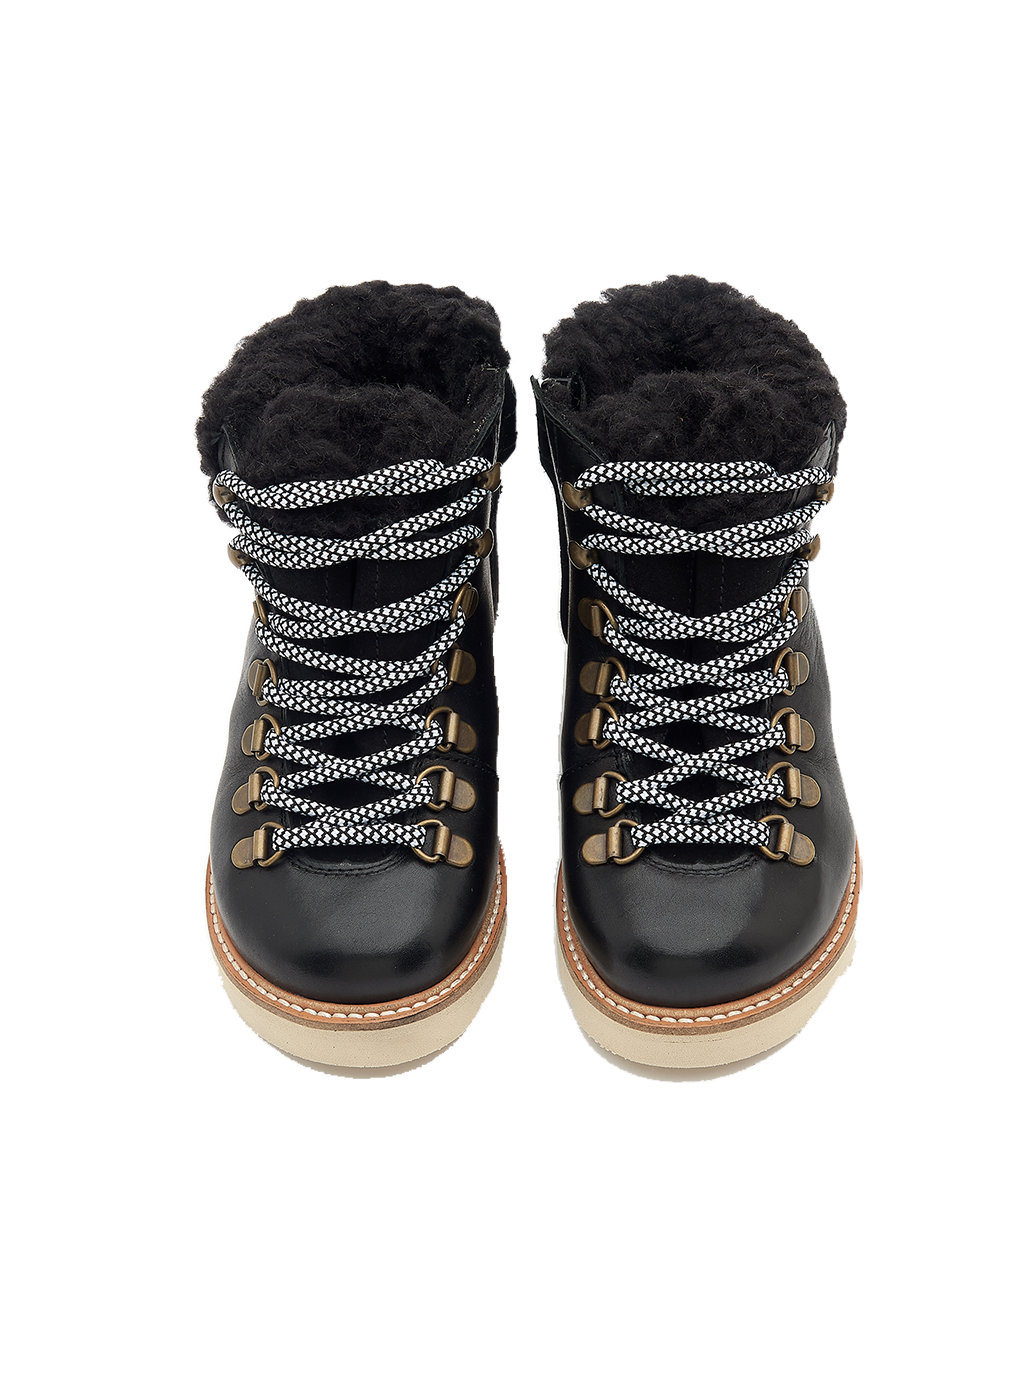 Eddie Fur Hiking Boots, insulated leather shoes